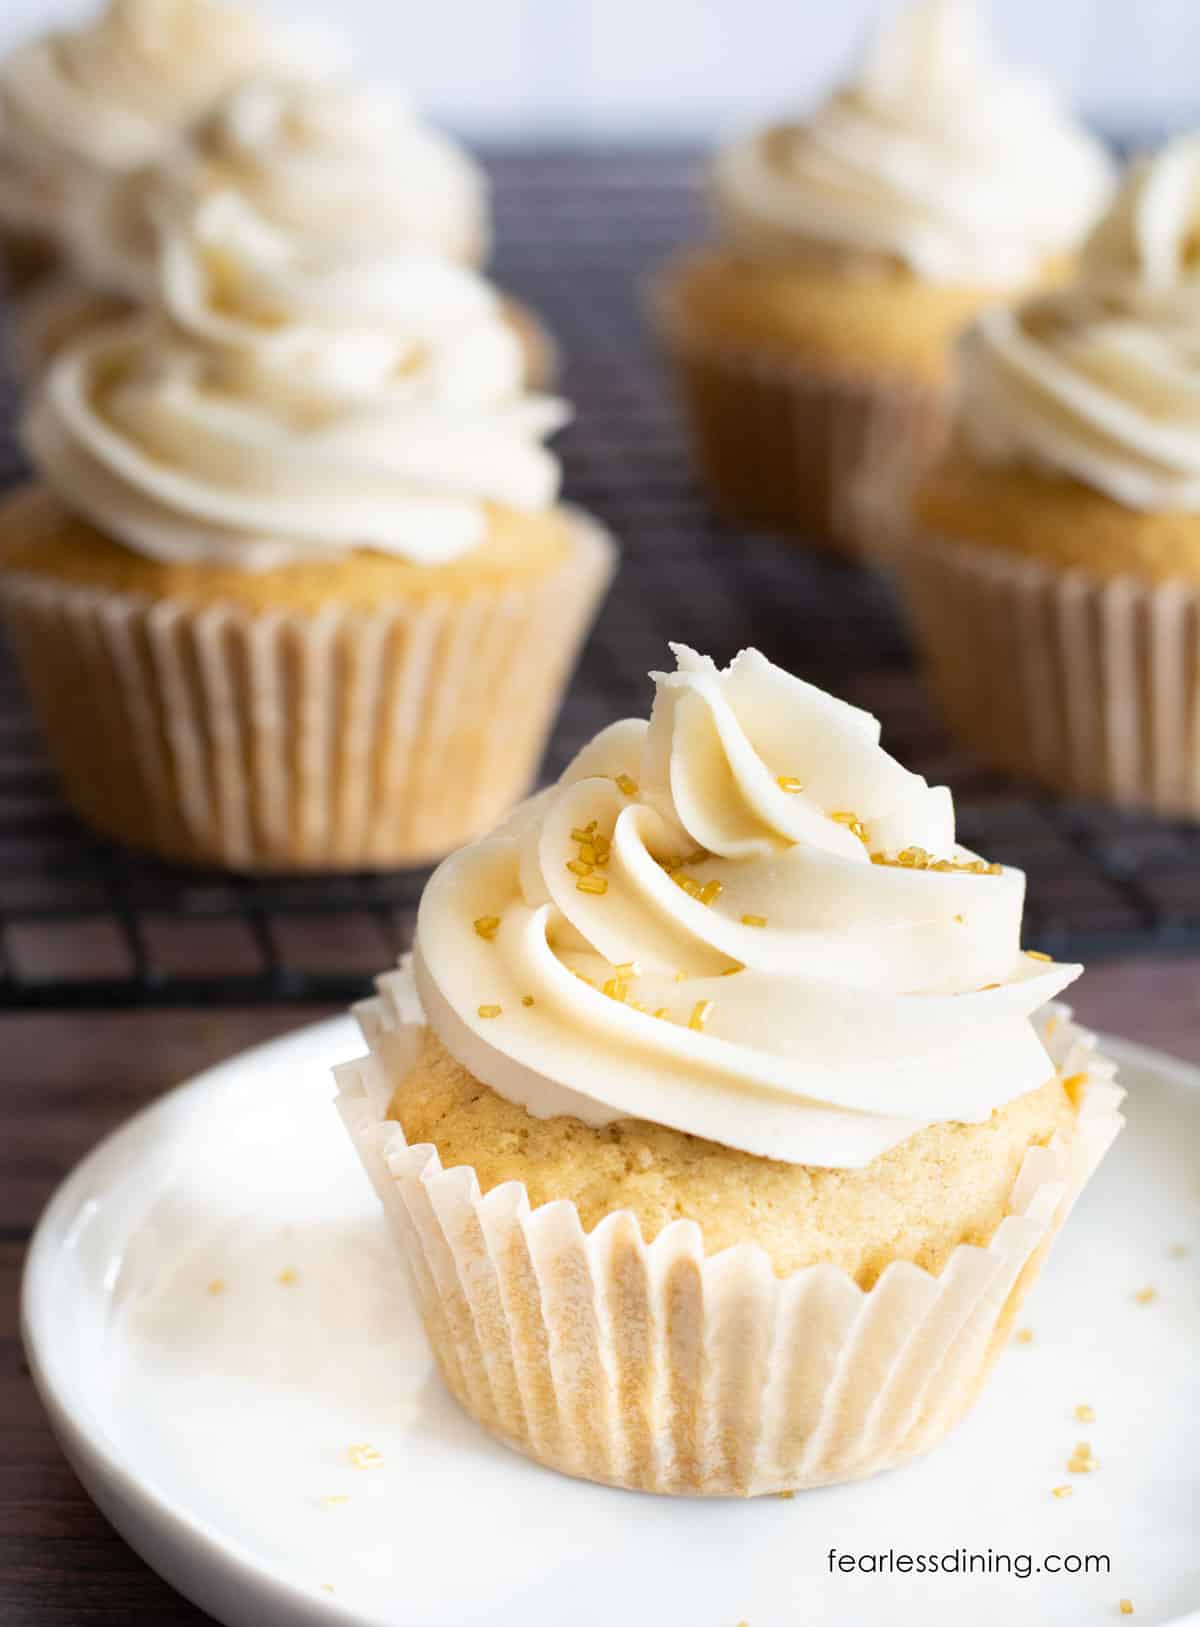 Lots of frosted gluten free eggnog cupcakes. They are topped with gold sprinkles.